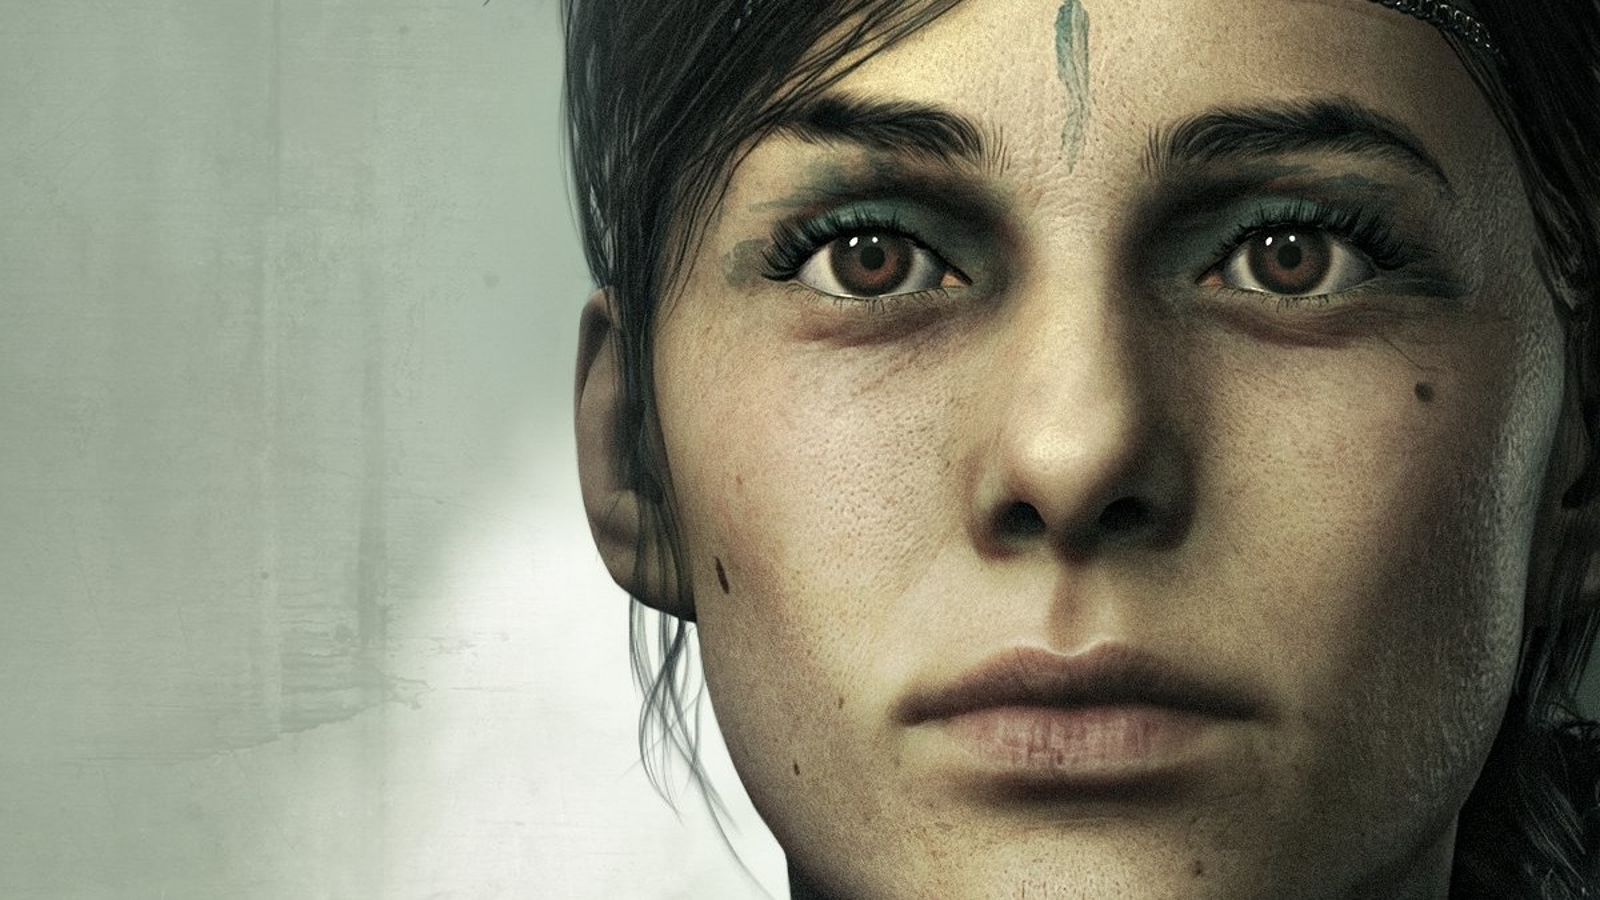 A Plague Tale: Requiem will launch in 2022, joining Xbox Game Pass